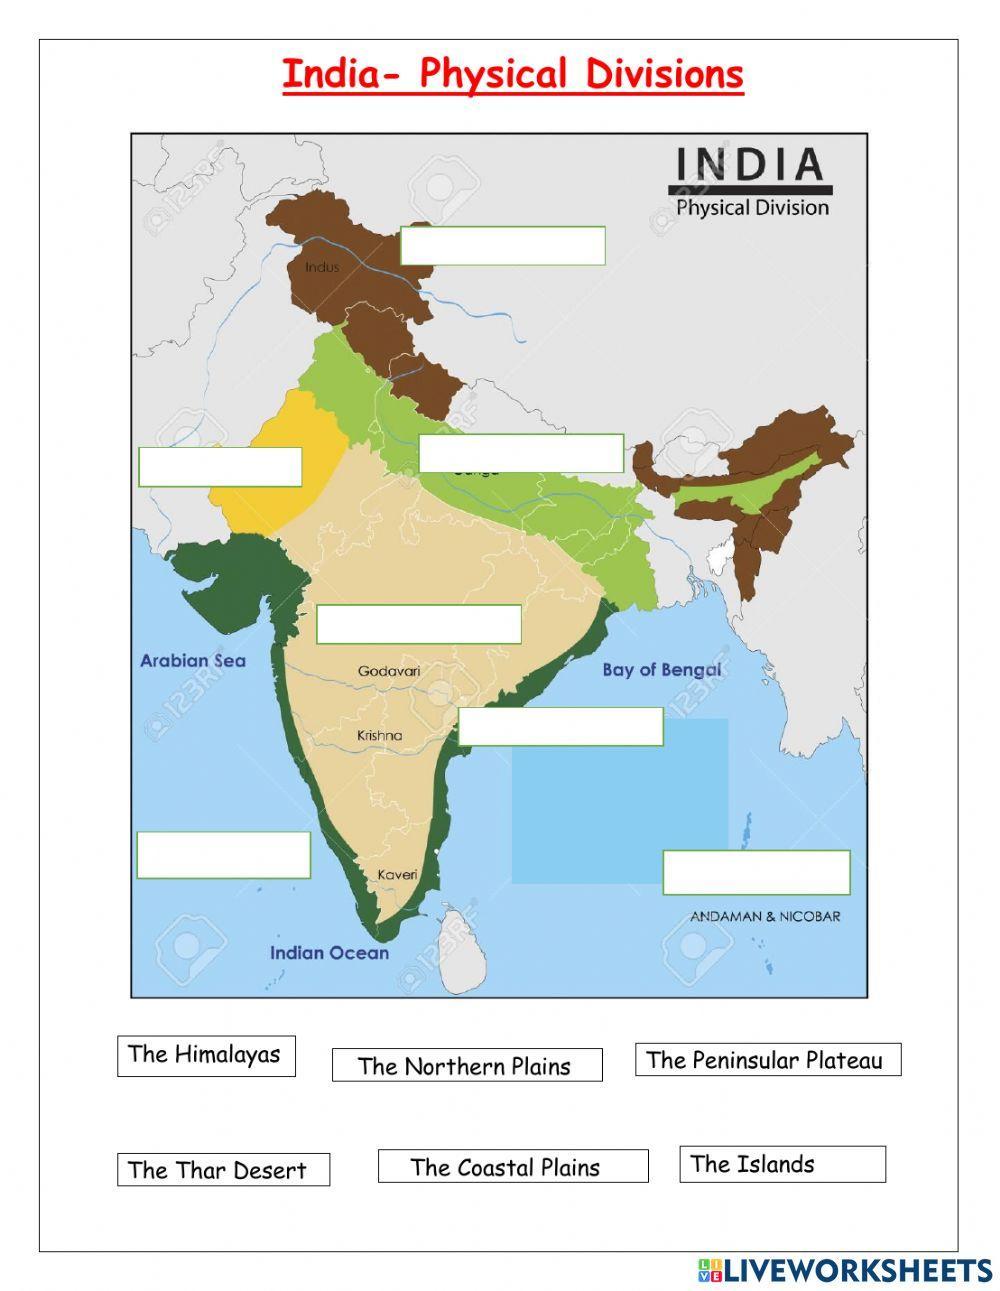 India- Physical Divisions